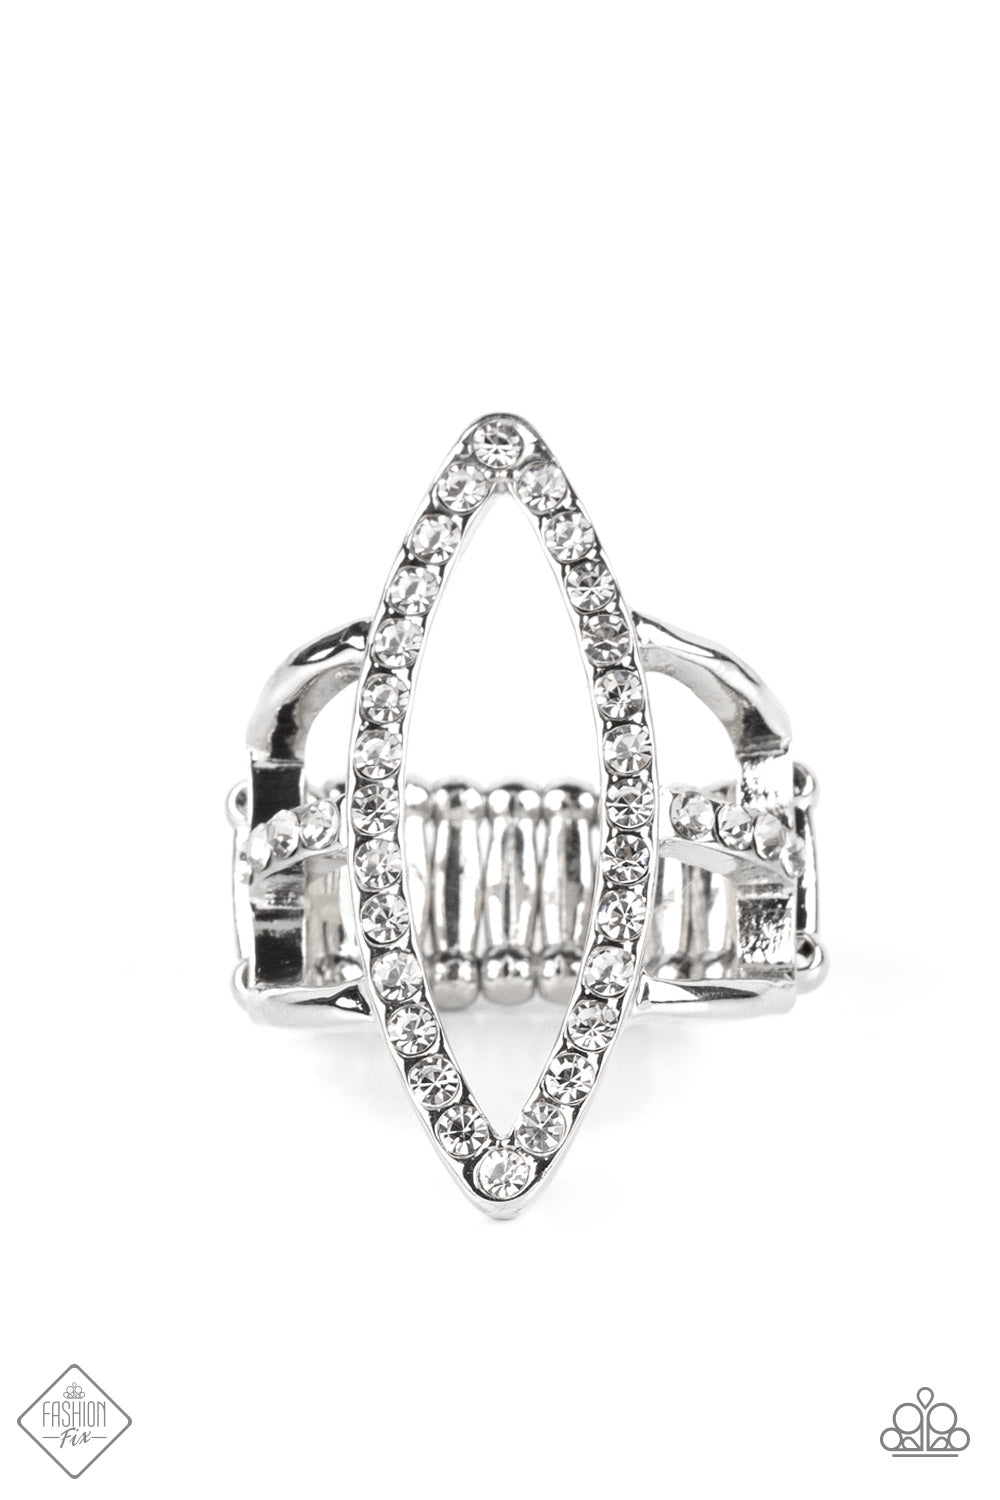 Icy Intuition - White and Silver Fashion Ring - Paparazzi Accessories - An exaggerated marquise-shaped frame dotted with rhinestones connects to three bands of silver that wrap around the finger. The center band is lined with more rhinestones, adding noteworthy sparkle to the airy design. Features a stretchy band for a flexible fit.